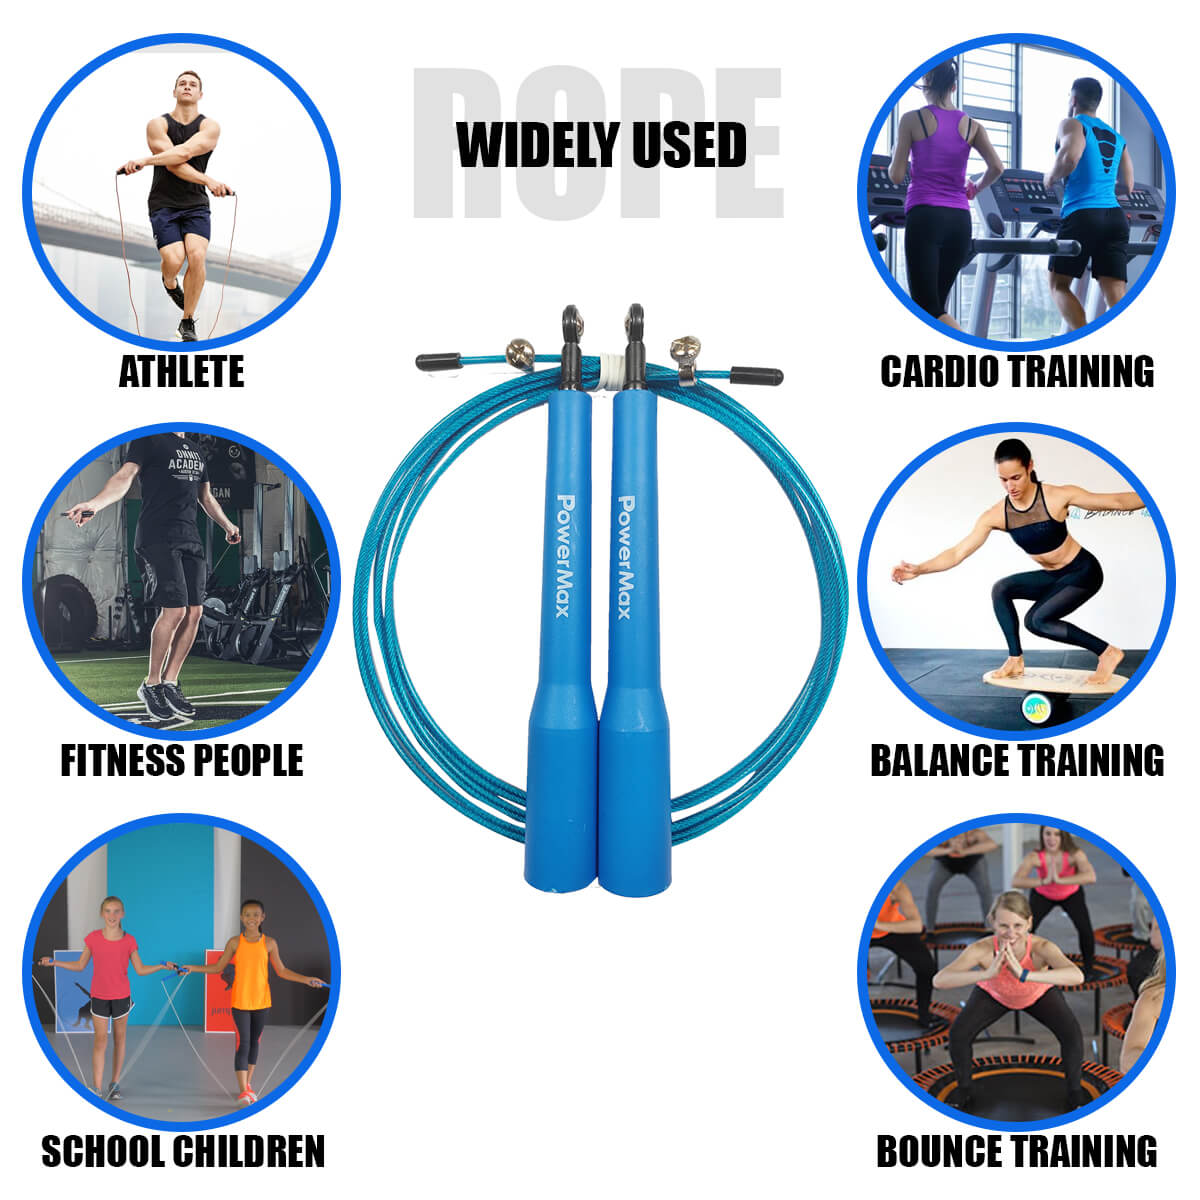 JP-5 (Blue)  Exercise Speed Jump Rope With Adjustable Cable